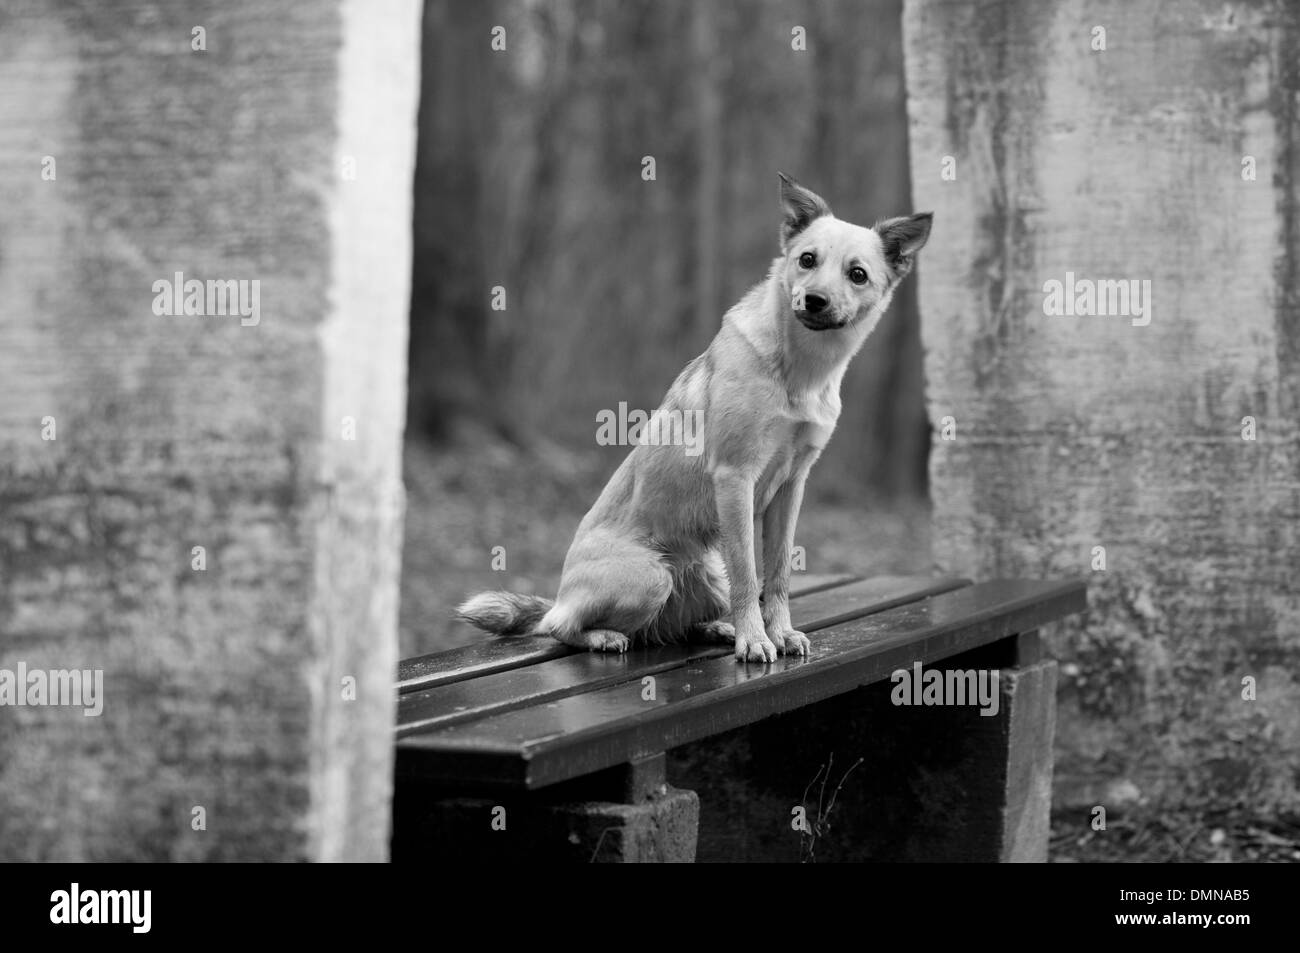 Dog sitting attentively on a bench Stock Photo